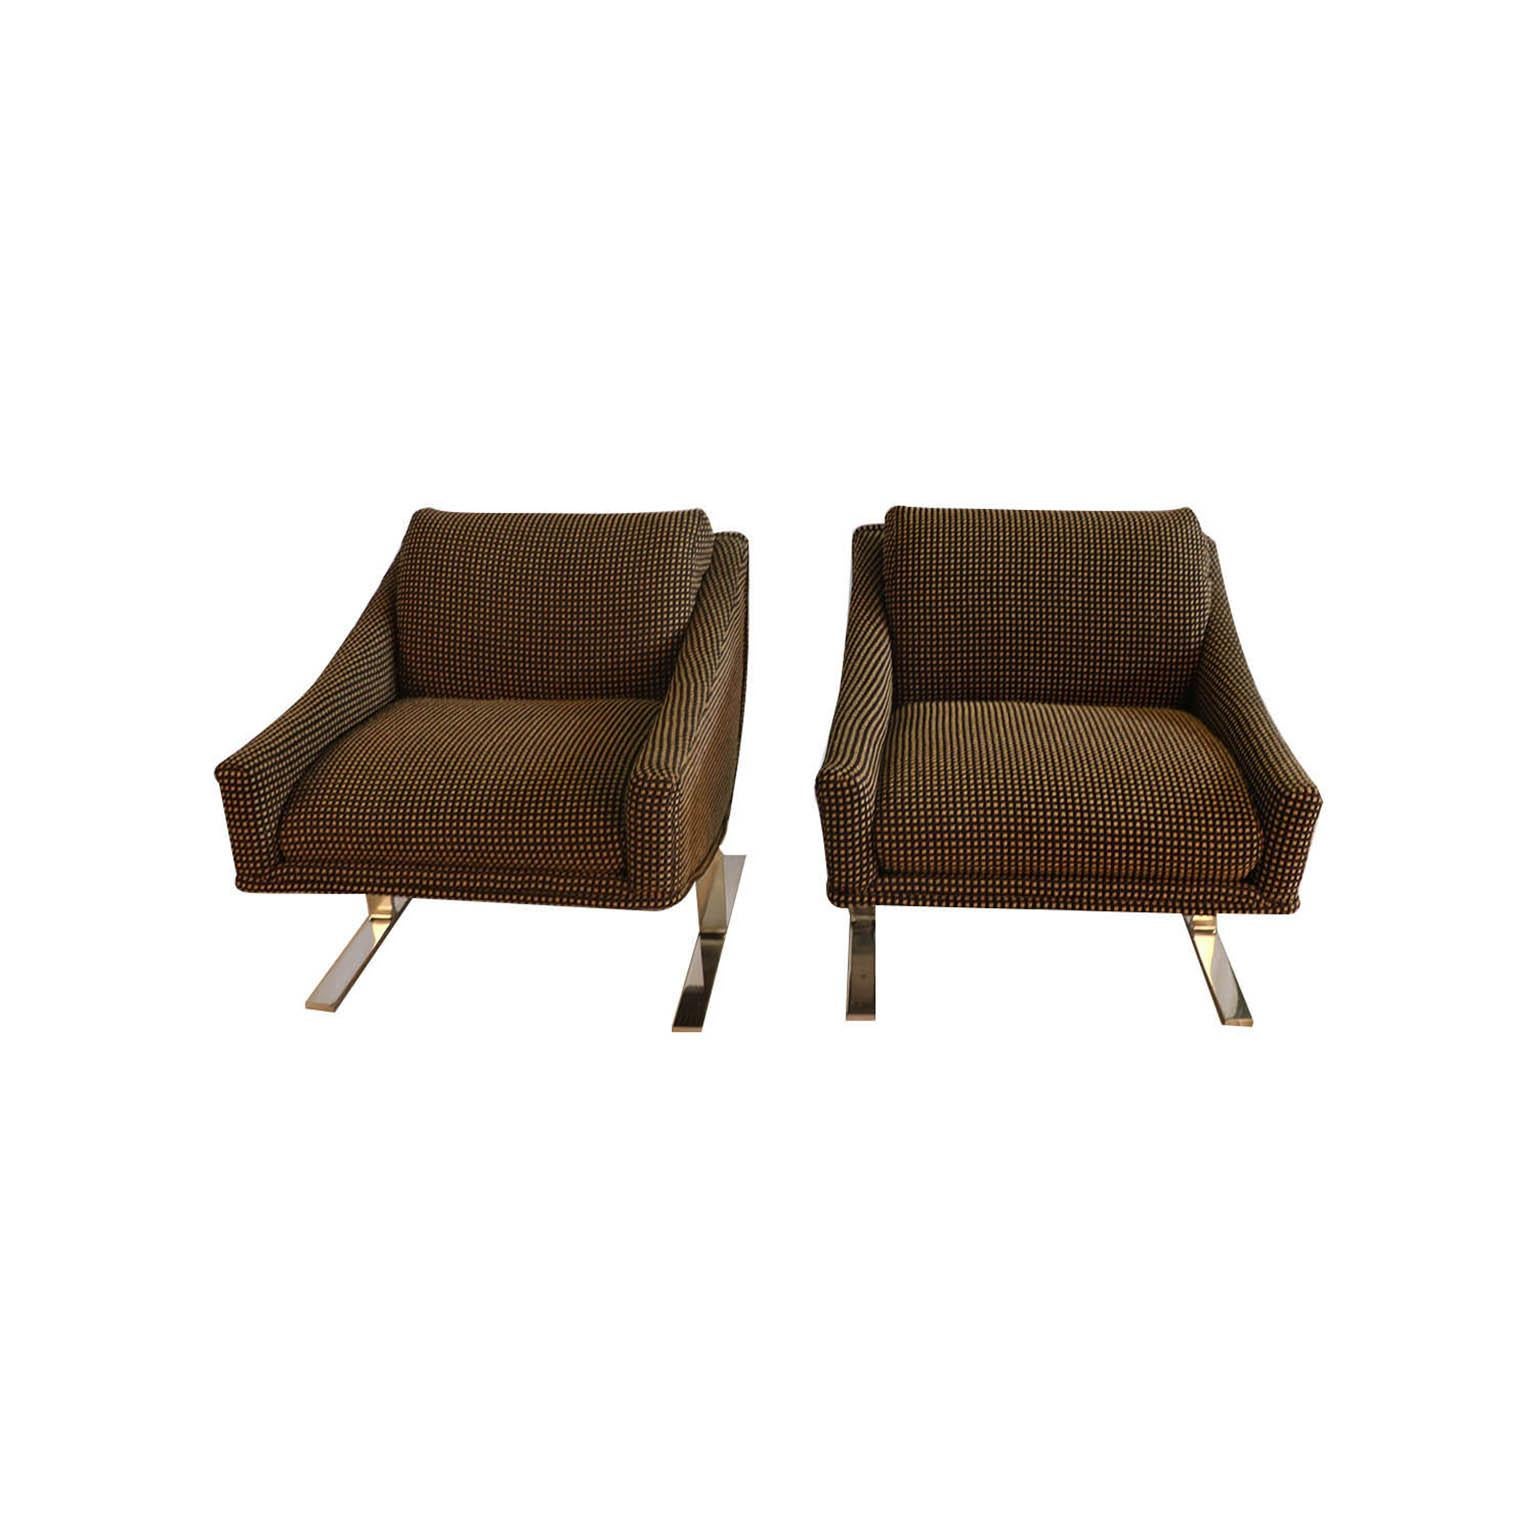 Polished Midcentury Kipp Stewart “Arc Lounge Chairs” for Directional